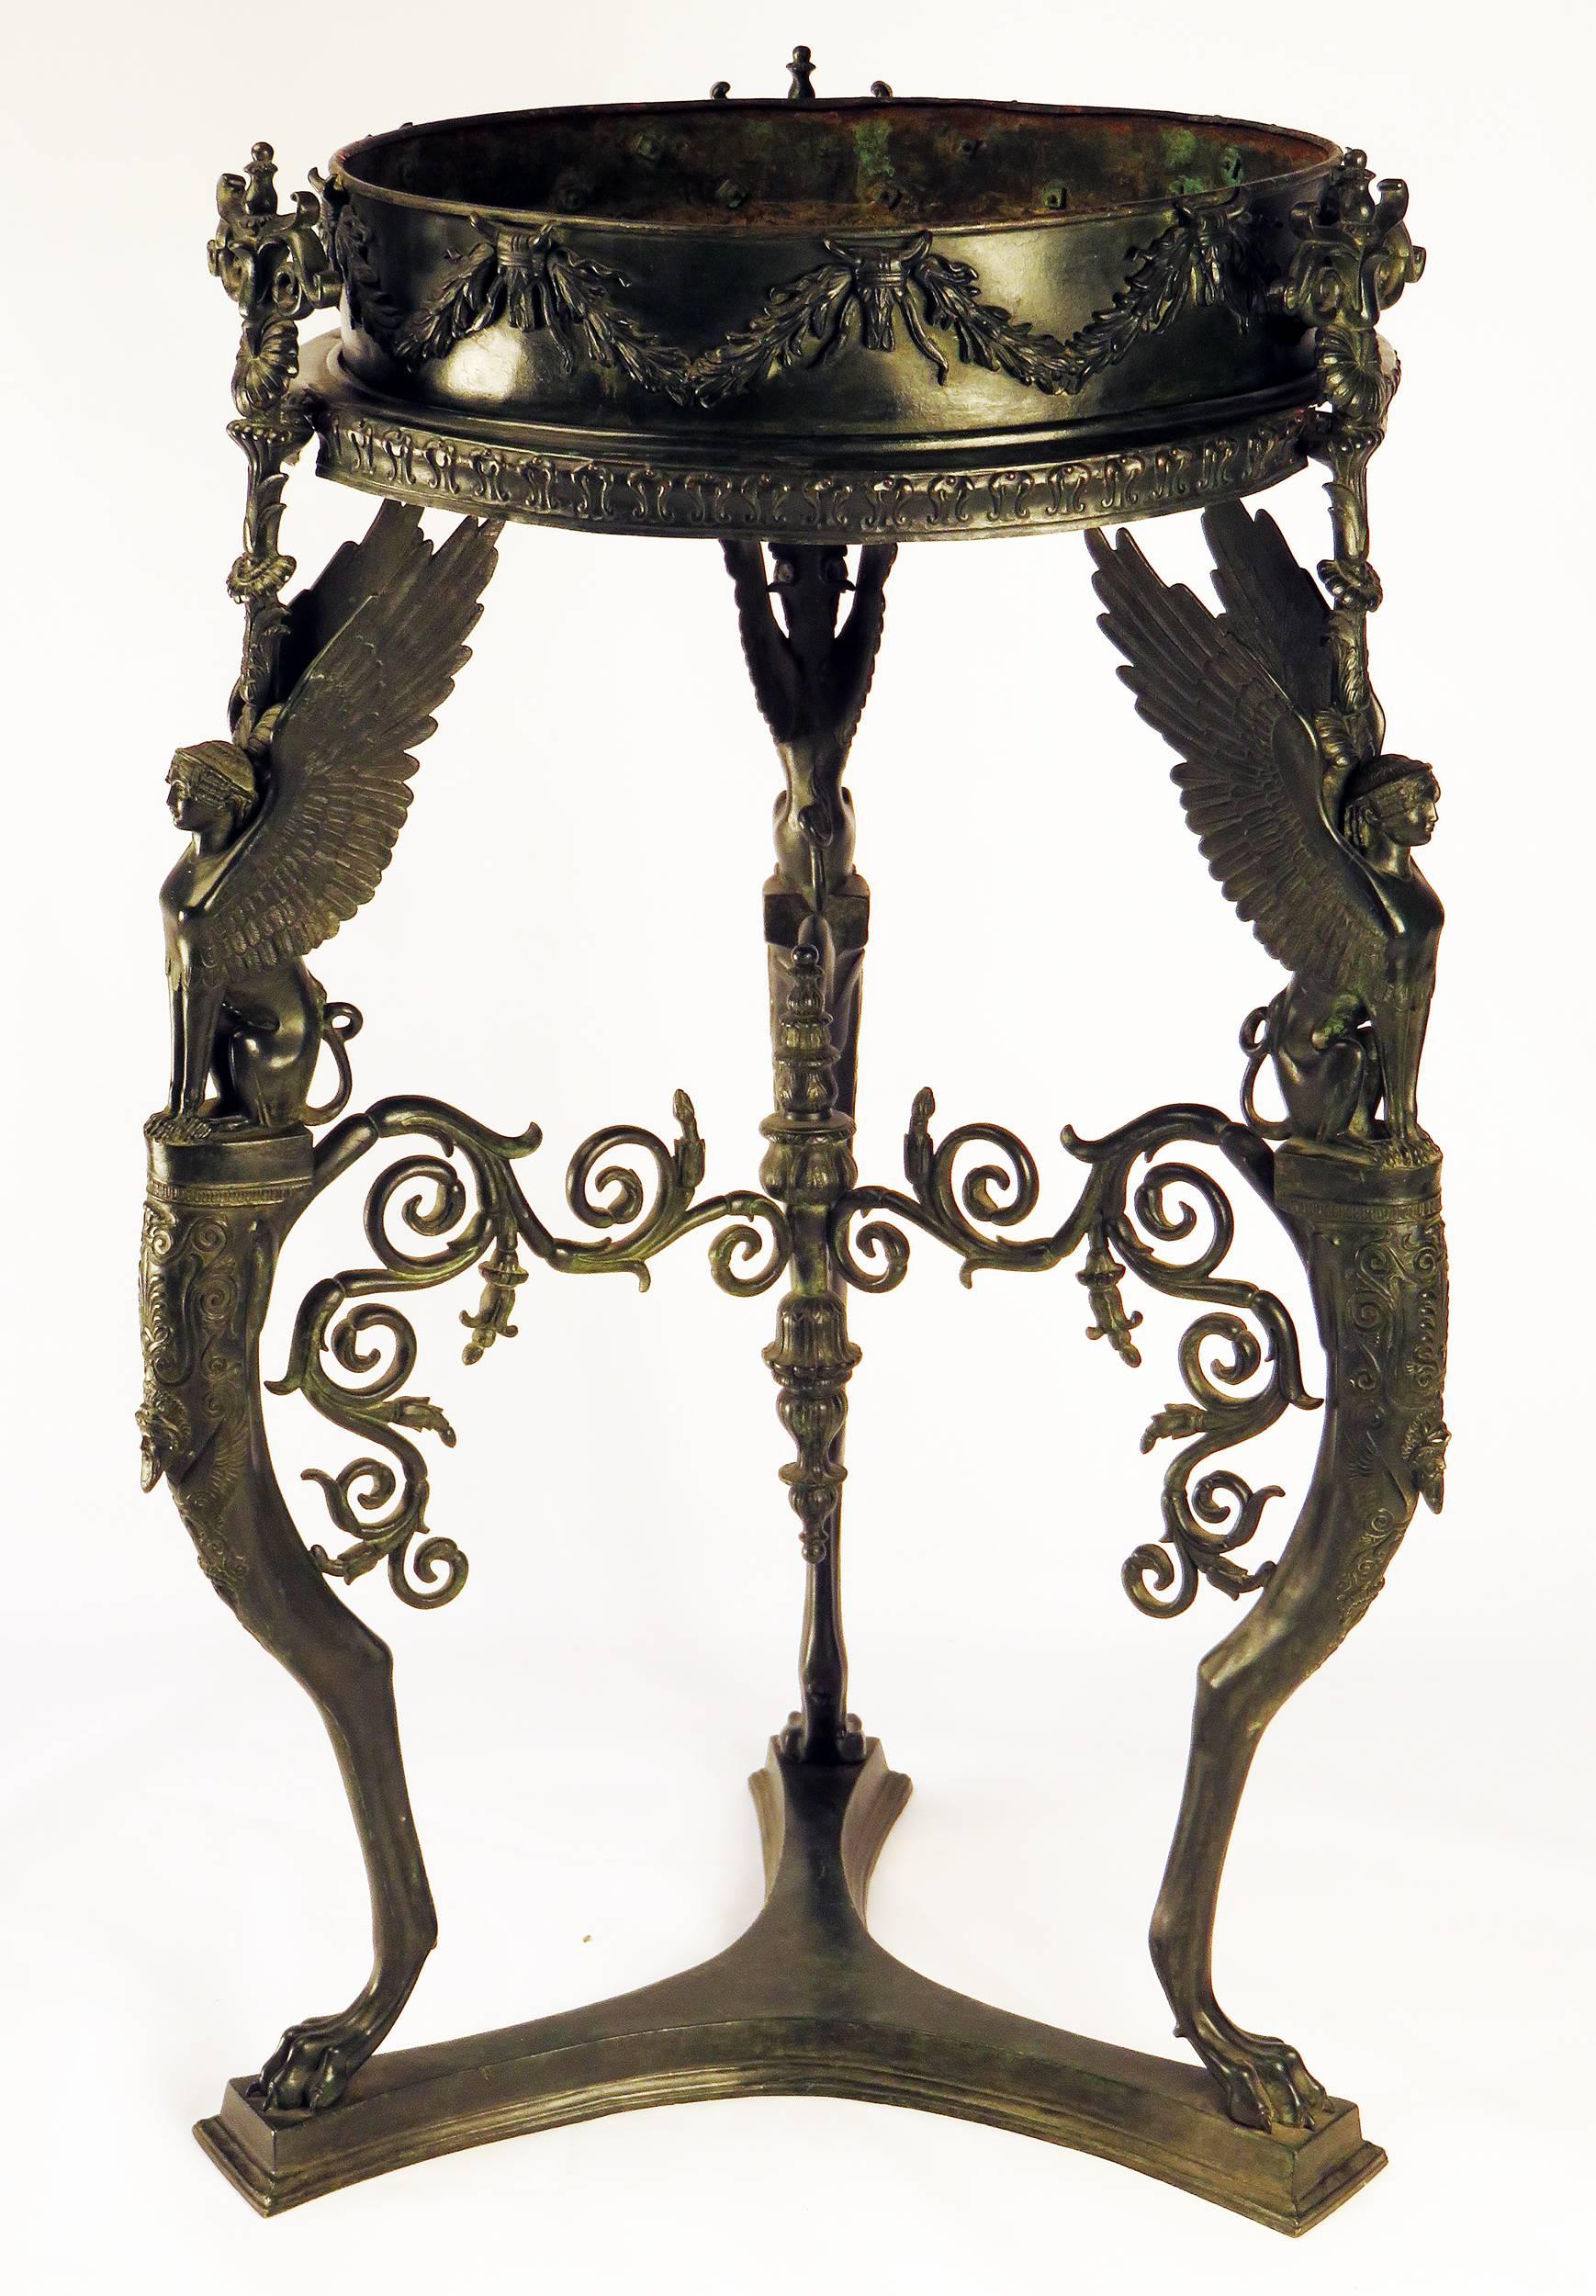 A 19th century patinated bronze stand, Athienienne, based on a Roman original found at Pompeii. A matching tripod was used at the baptism of Napoleon's son, the king of Rome. This type of stand was copied during the 18th-19th centuries. Acquired in